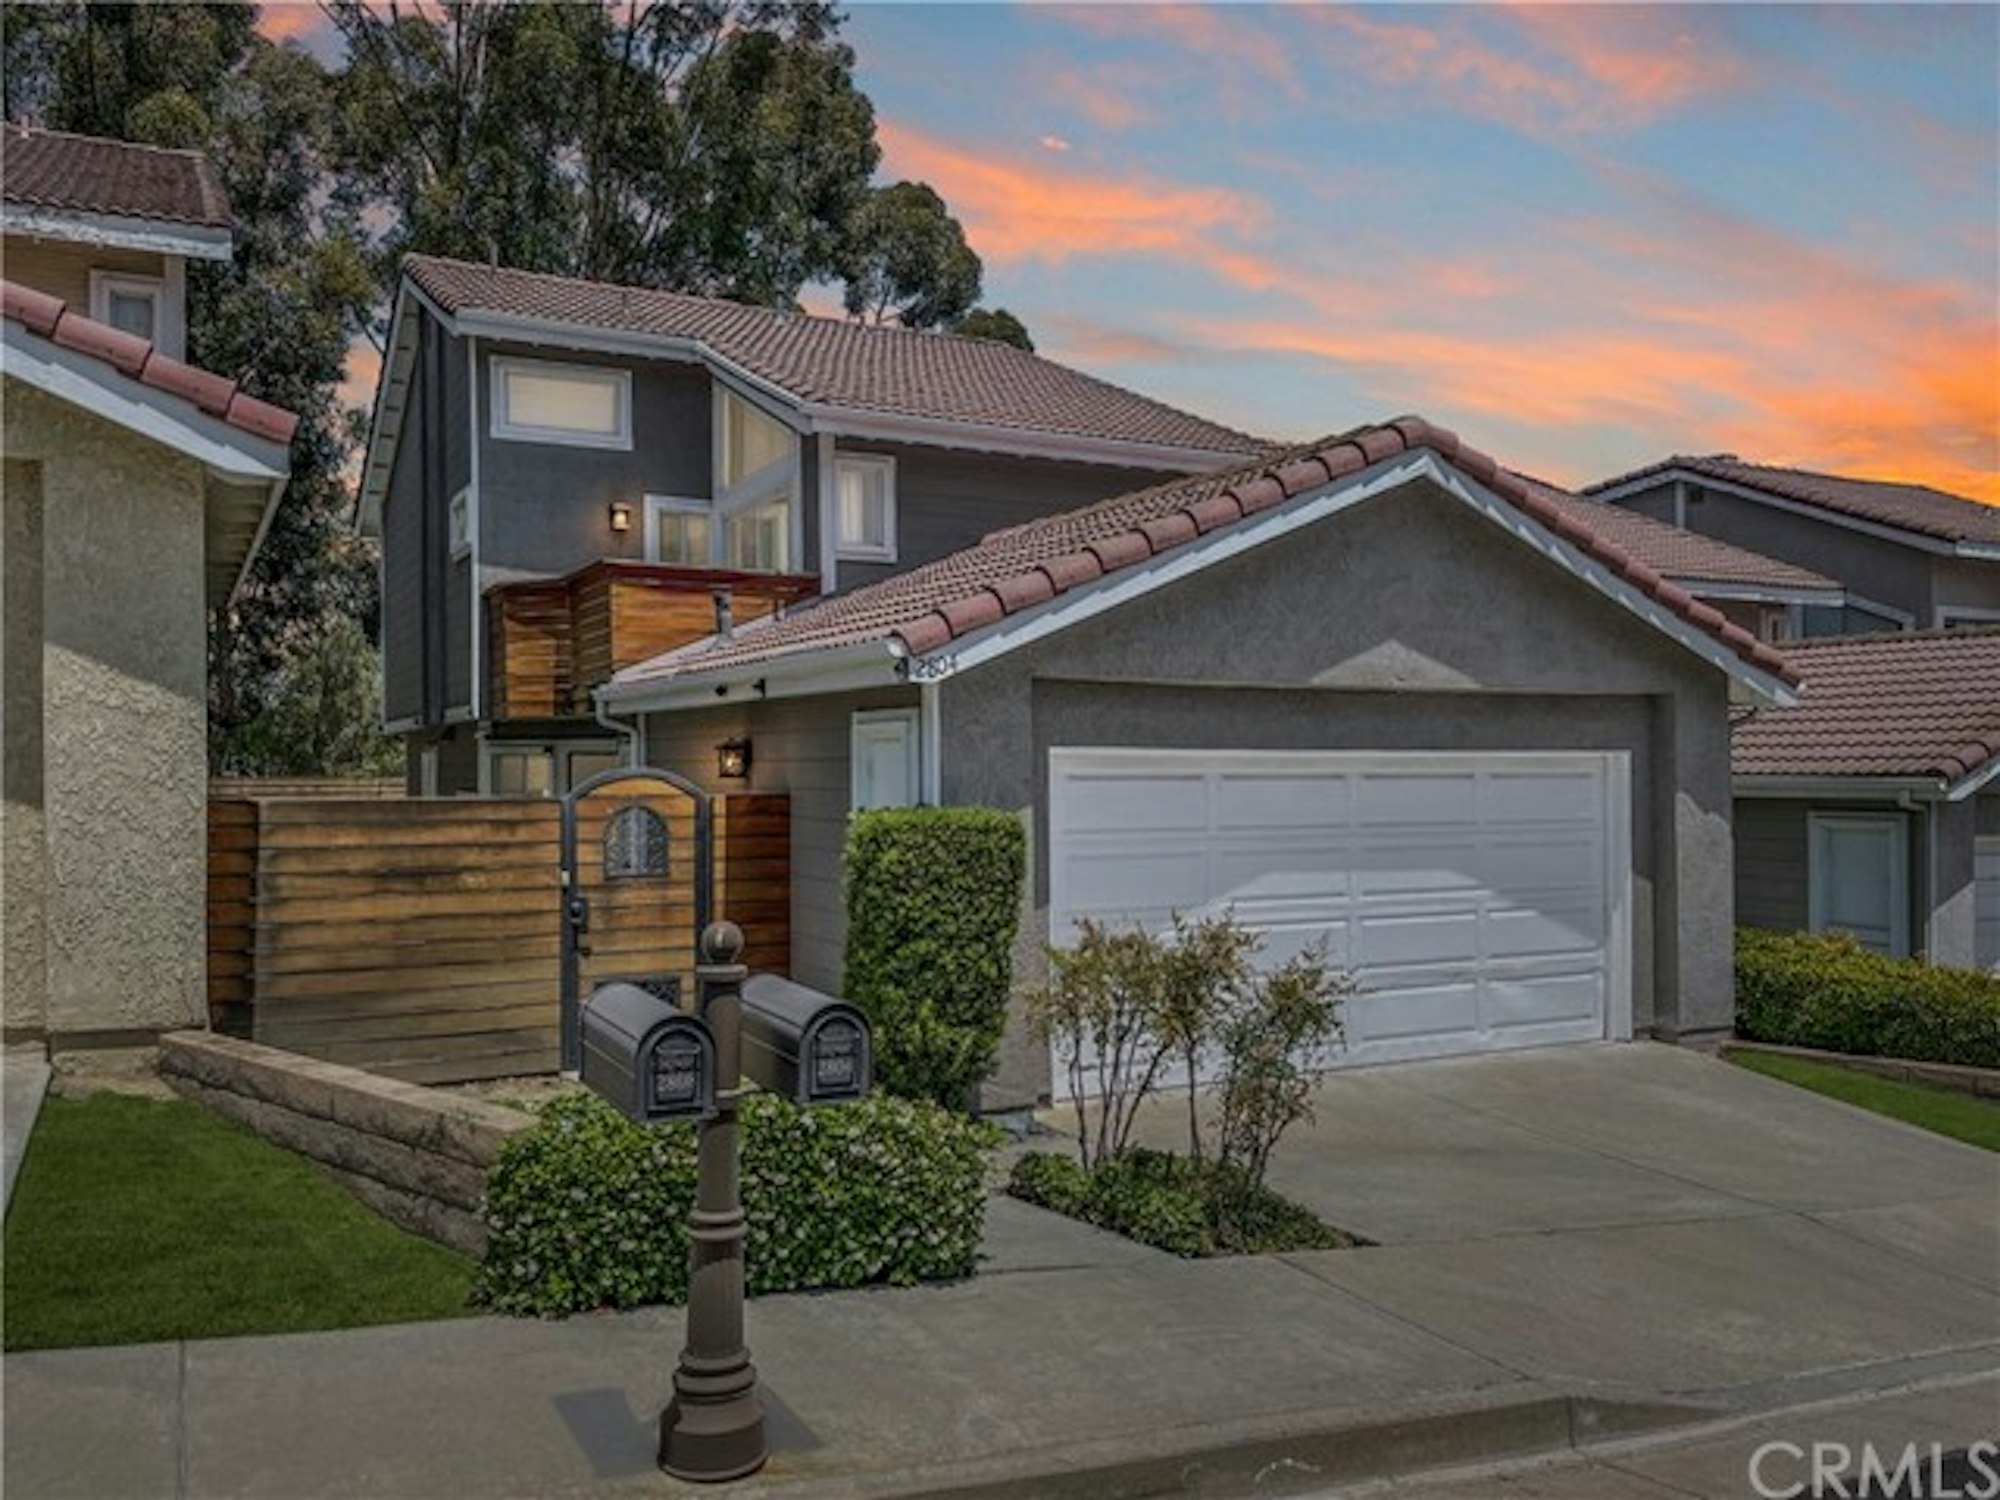 Photo 1 of 52 - 2804 Hickory Pl, Fullerton, CA 92835